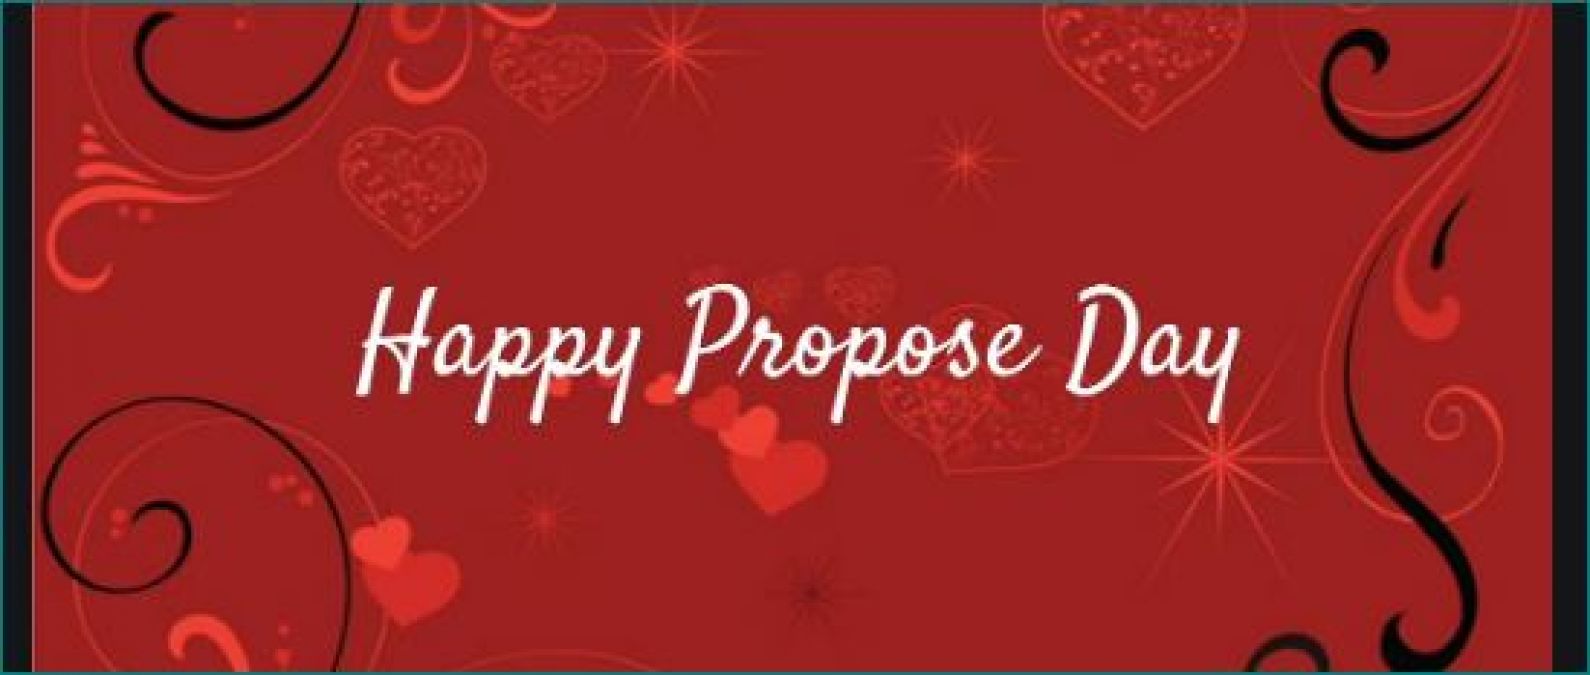 Happy Propose Day: These ways you can propose to your partner